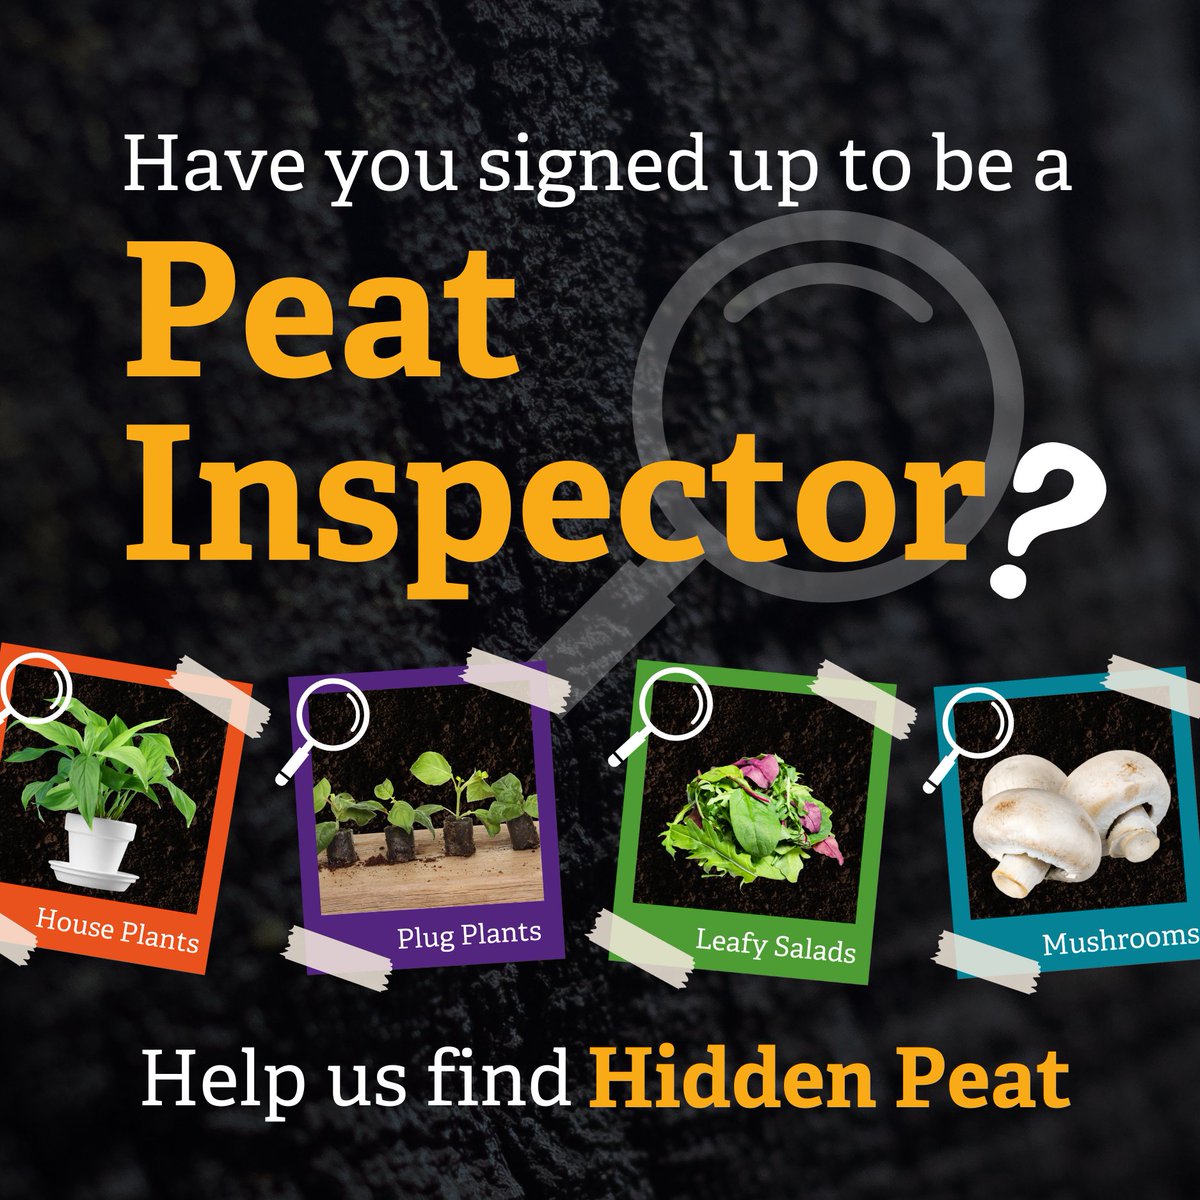 Have you signed up to be a 'Peat Inspector'? 🔎 Help us find where peat might be hiding by becoming a 'Peat Inspector'! To learn more, read our news article below: bit.ly/49aYMIV To sign up, visit: bit.ly/3rGFVmL